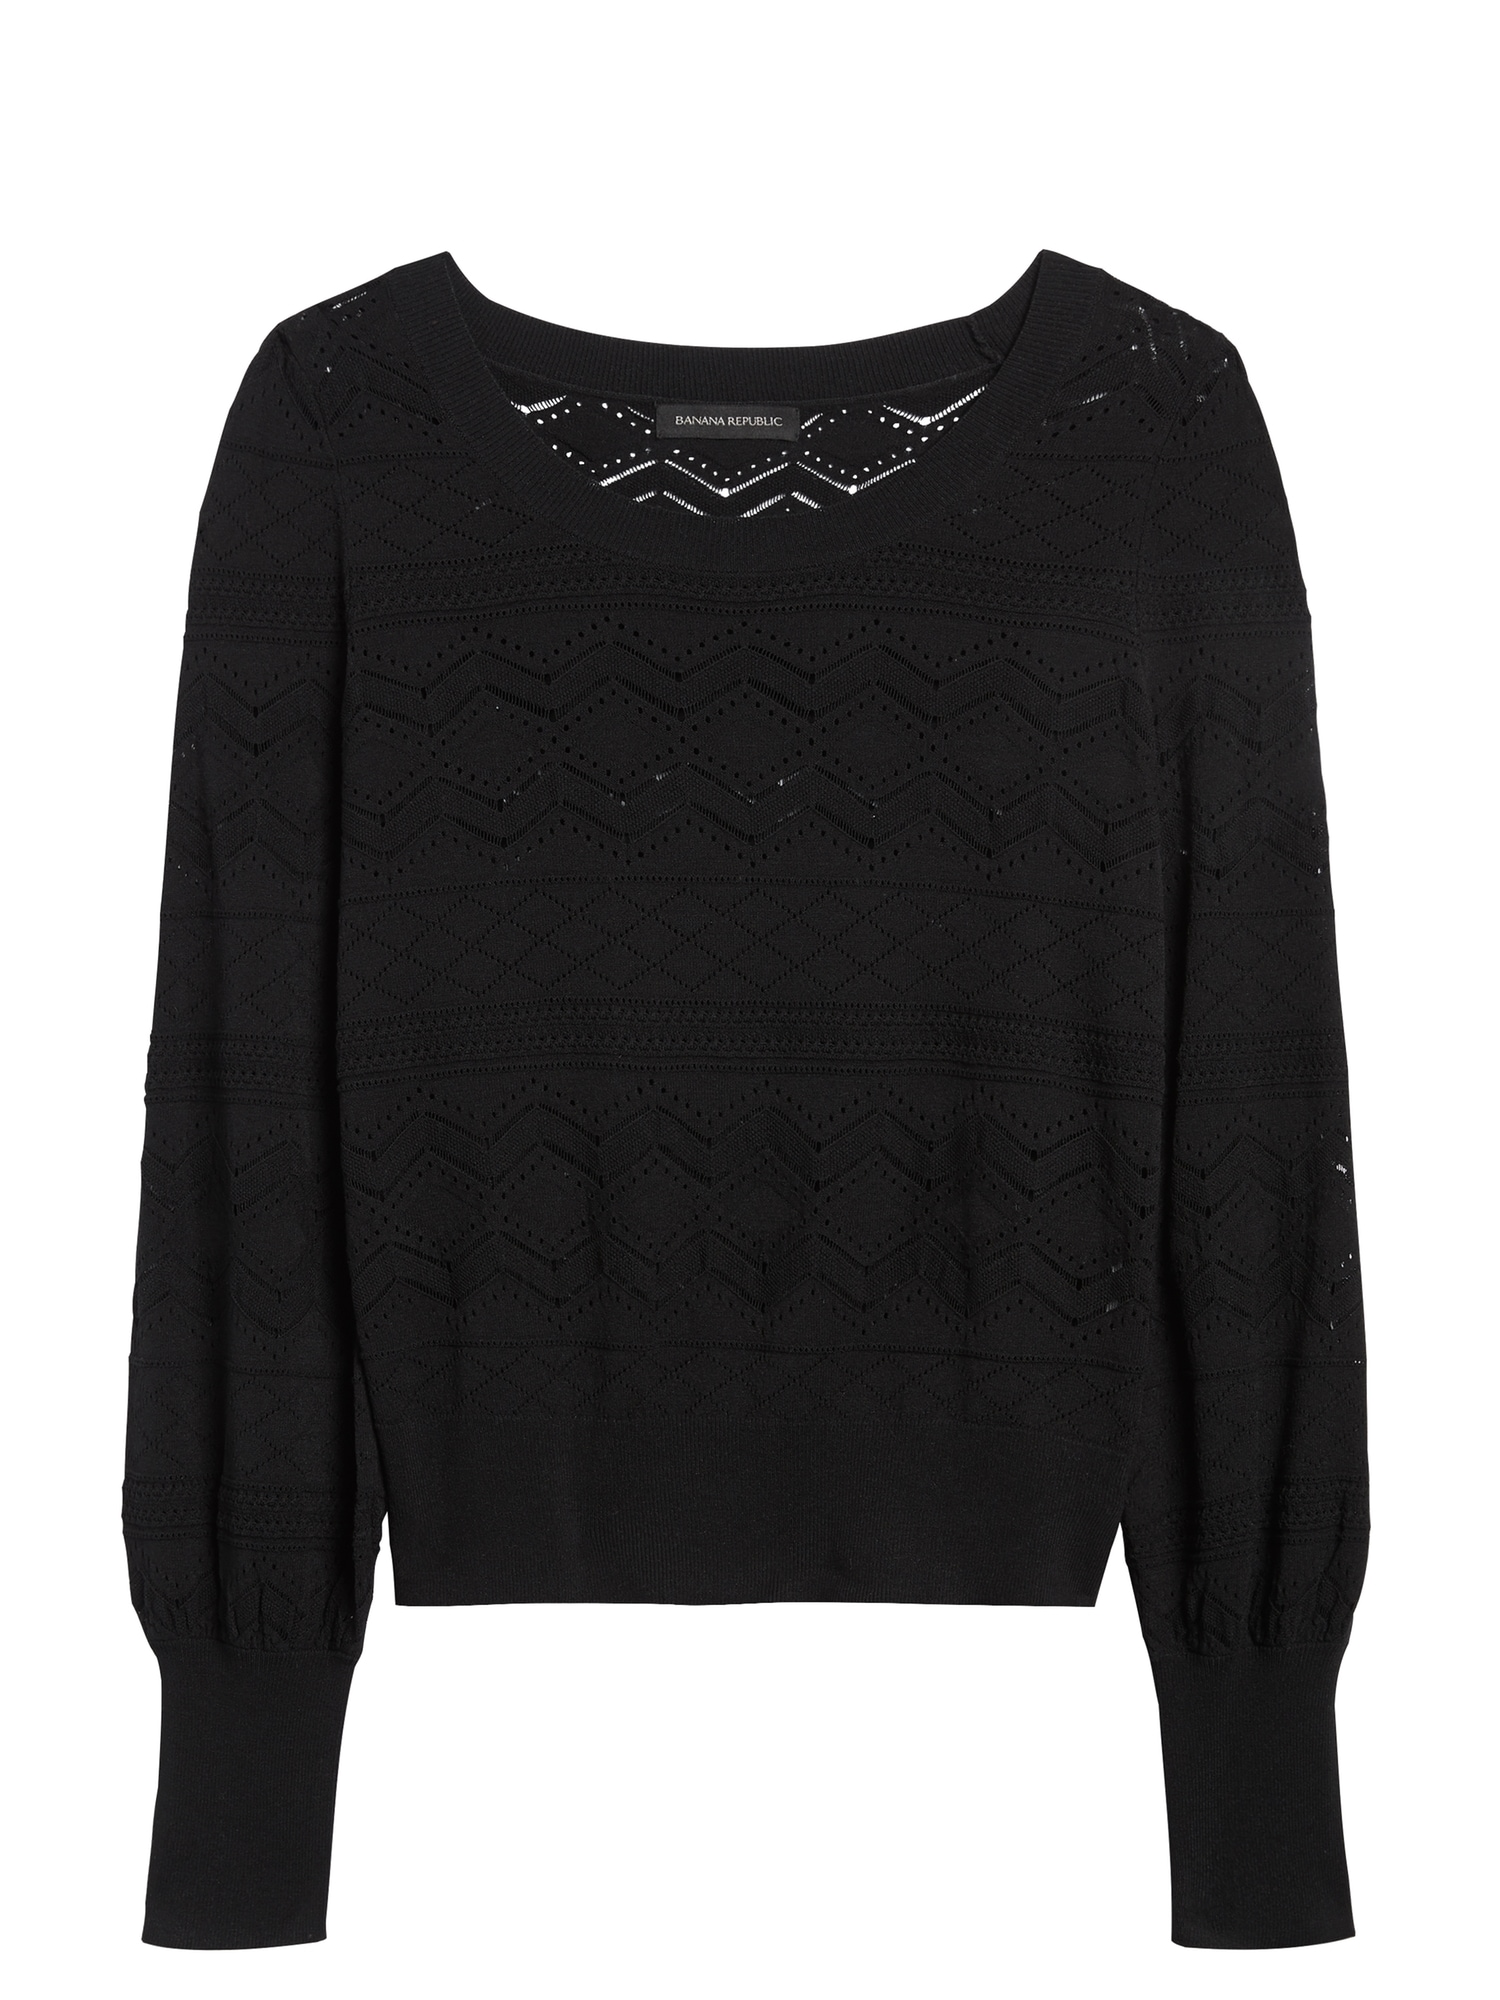 Petite Pointelle Cropped Sweater